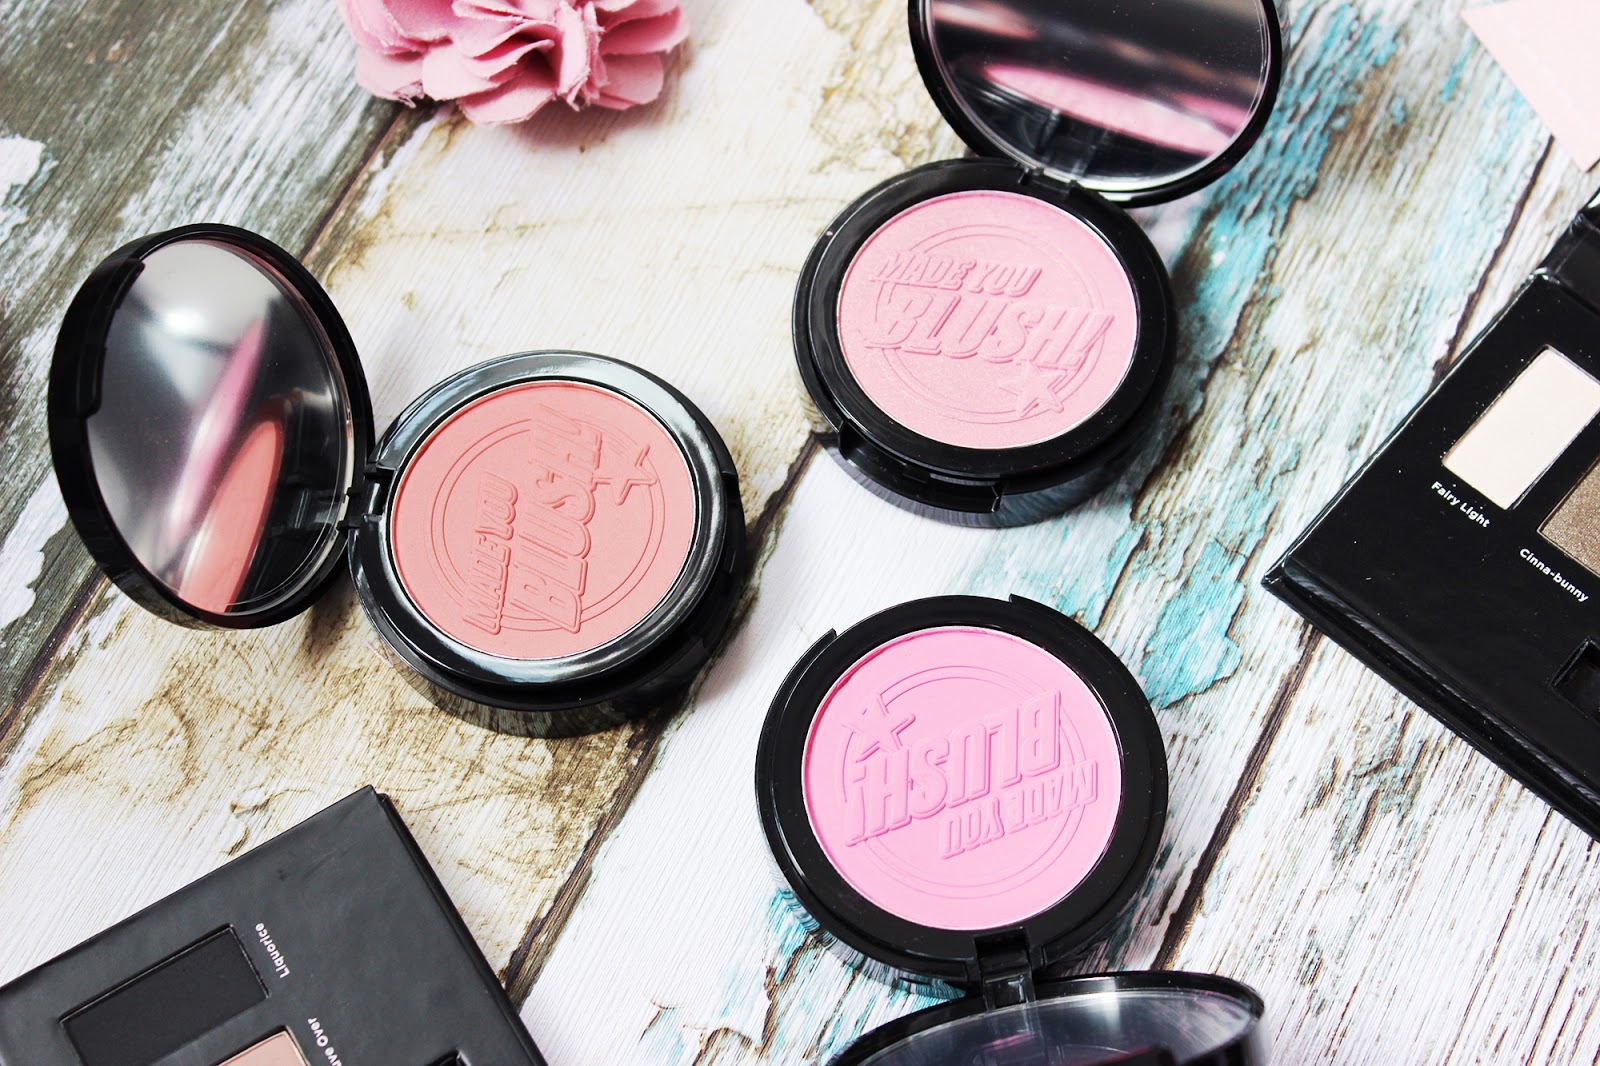 Soap & Glory Made You Blush blusher review and swatches